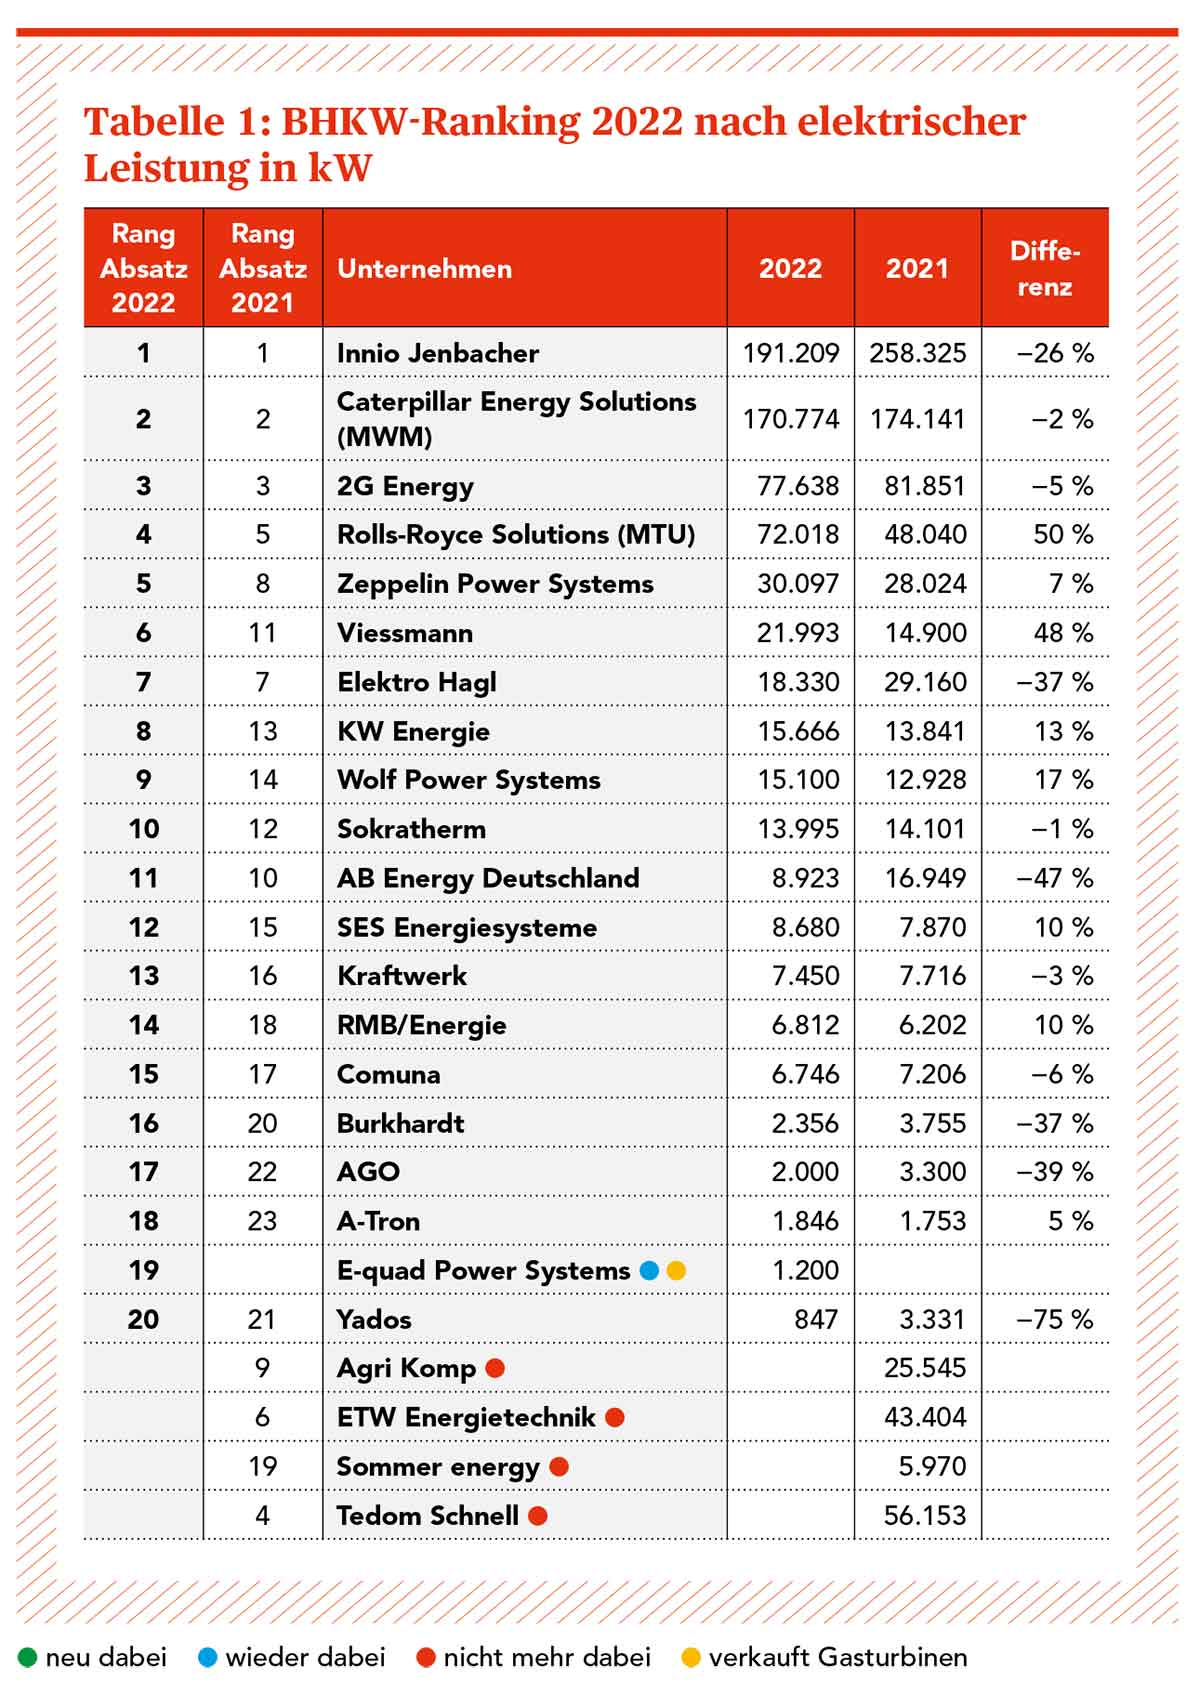 Table 1: Cogeneration Power Plant Ranking 2022 comparing electrical output in kW